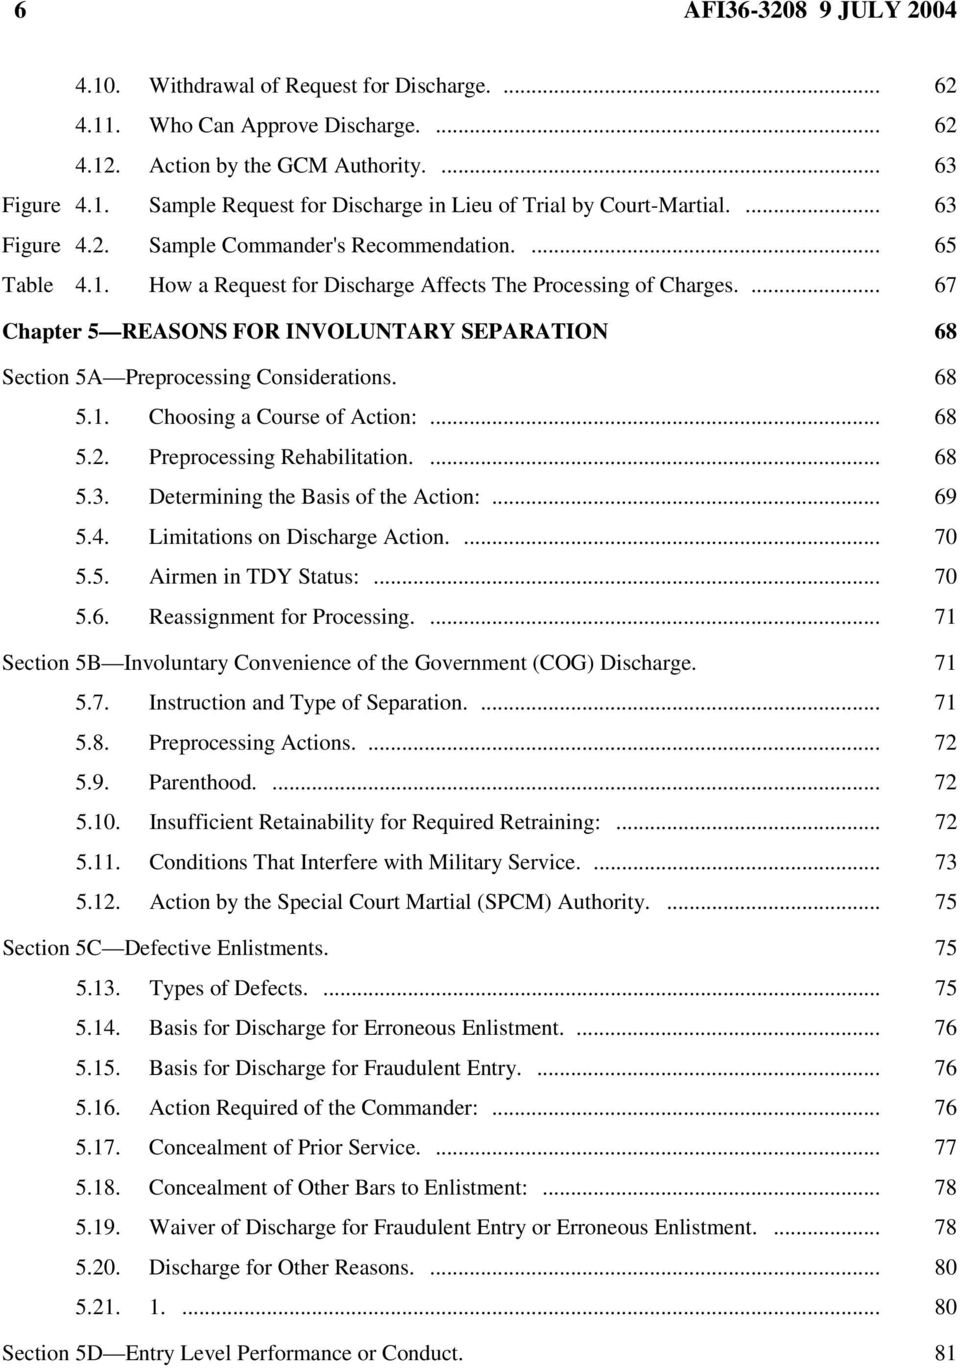 ... 67 Chapter 5 REASONS FOR INVOLUNTARY SEPARATION 68 Section 5A Preprocessing Considerations. 68 5.1. Choosing a Course of Action:... 68 5.2. Preprocessing Rehabilitation.... 68 5.3.